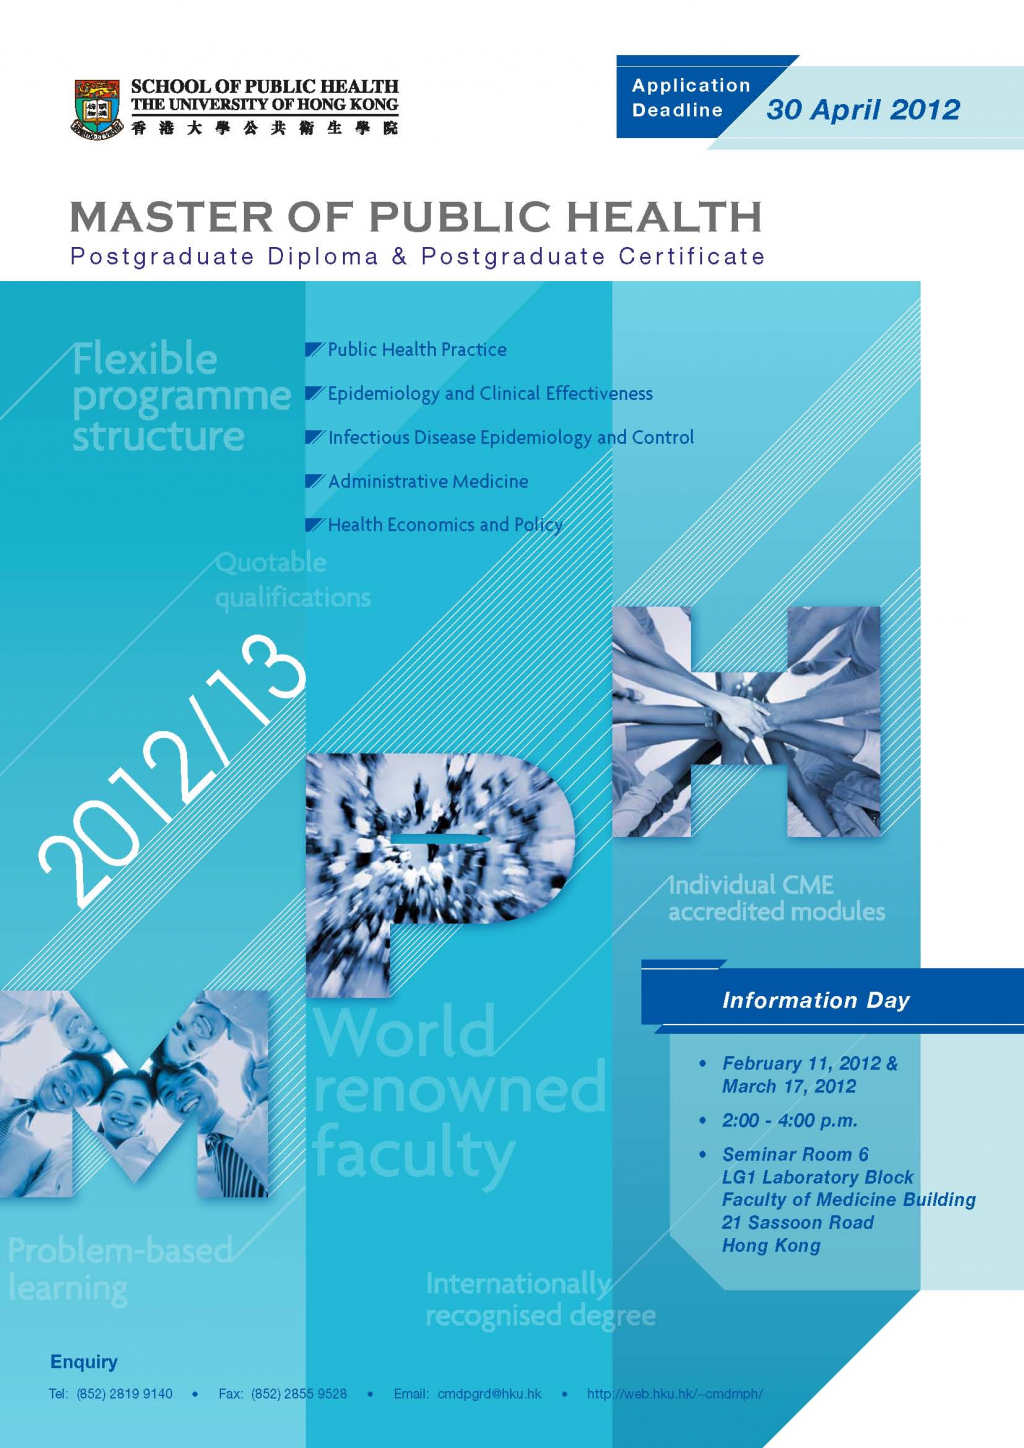 Master of Public Health Information Day